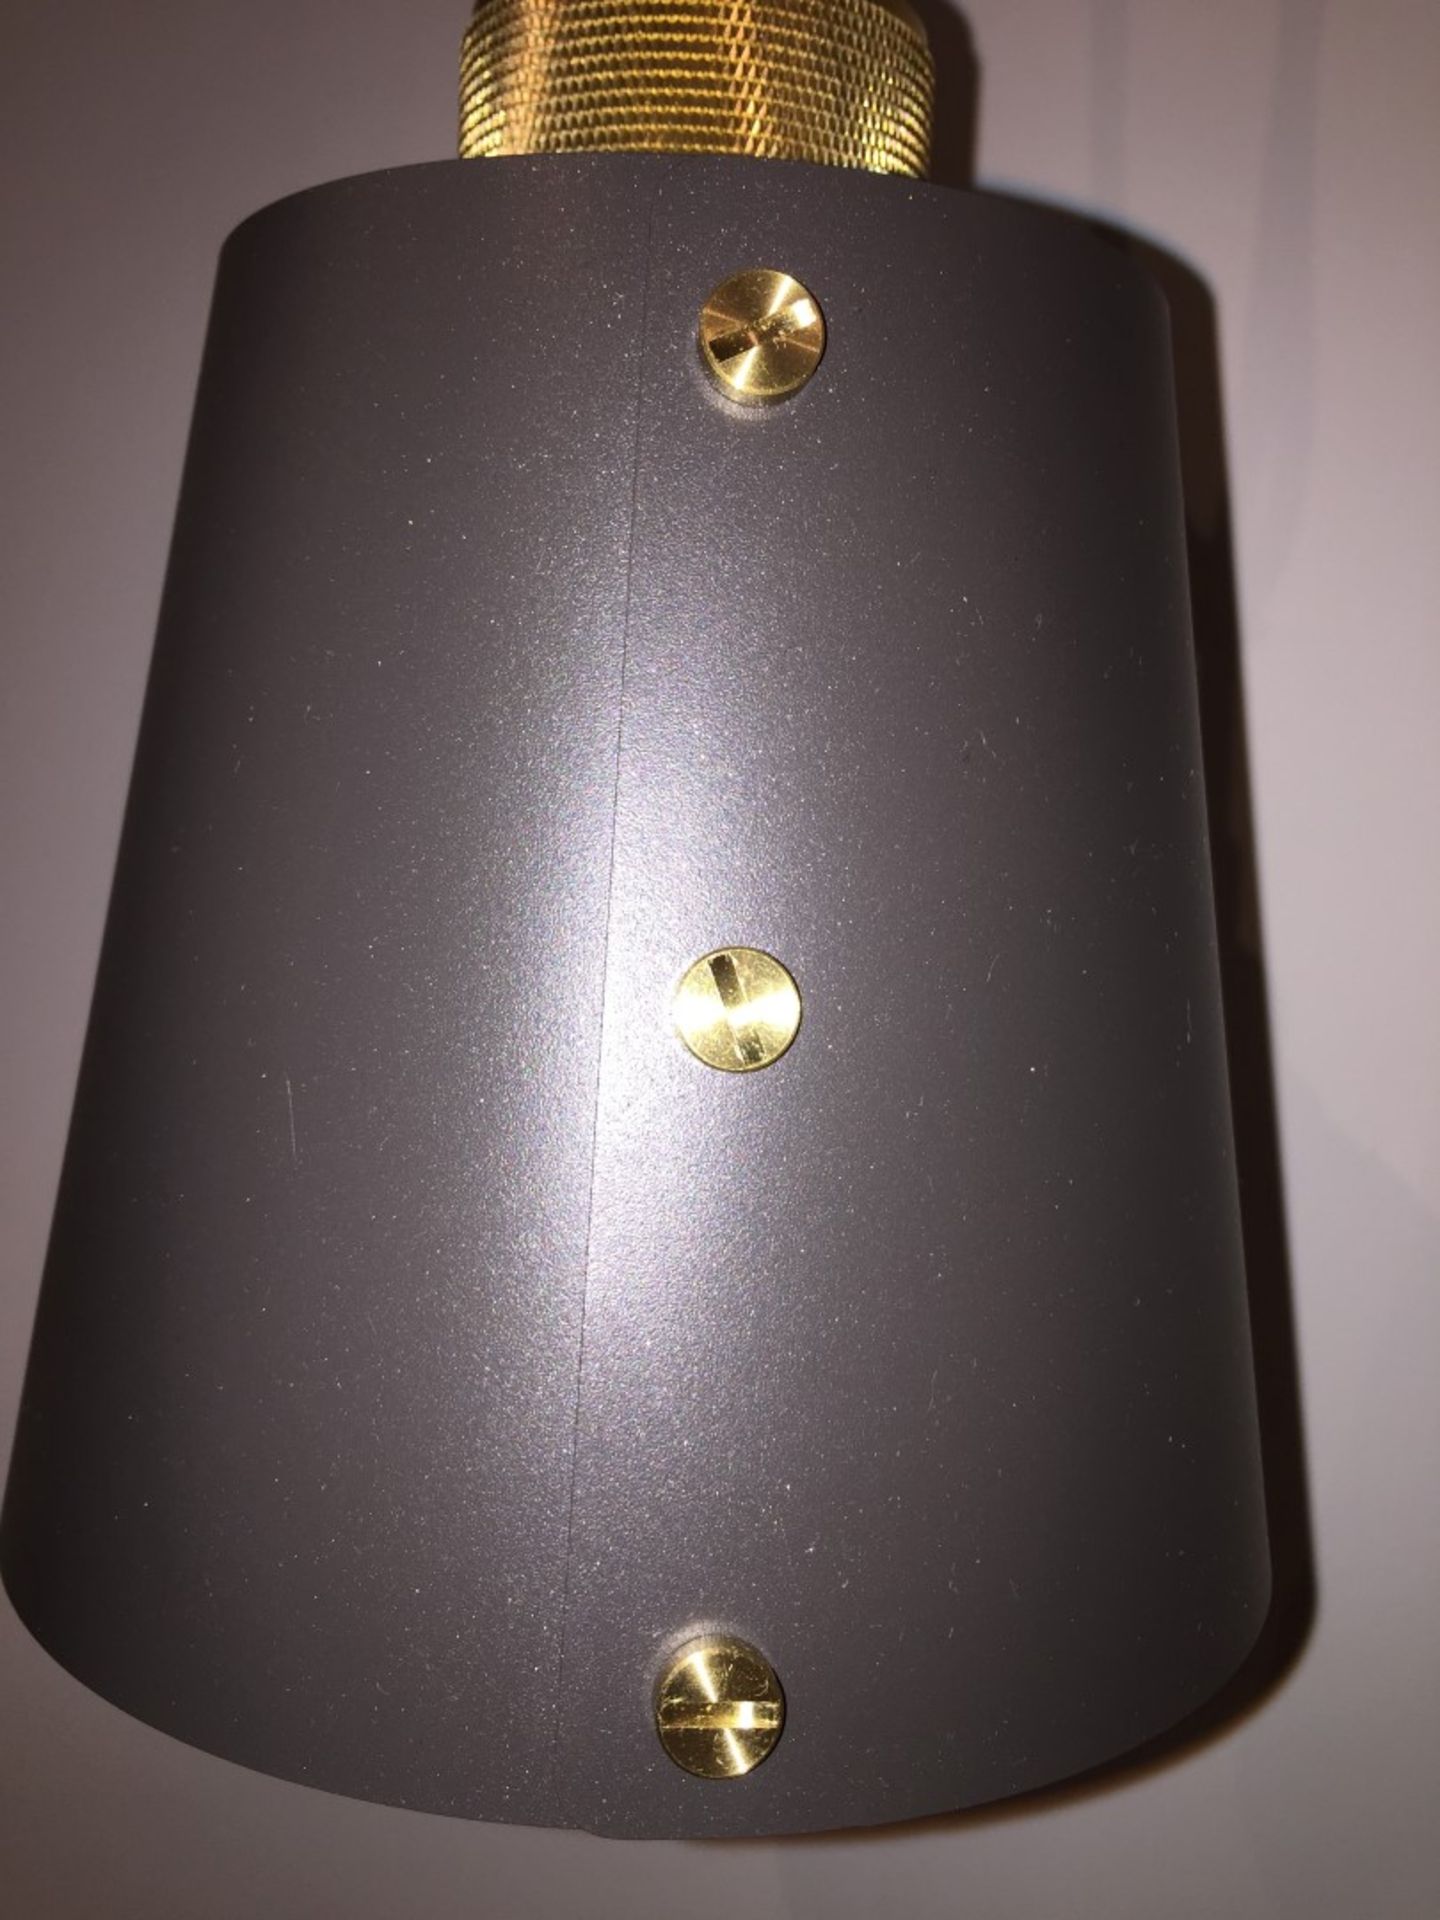 1 x BUSTER + PUNCH Hooked Wall Light With Metal Shade - Ref: WS/FF160F - CL204 - Location: London Ci - Image 8 of 10